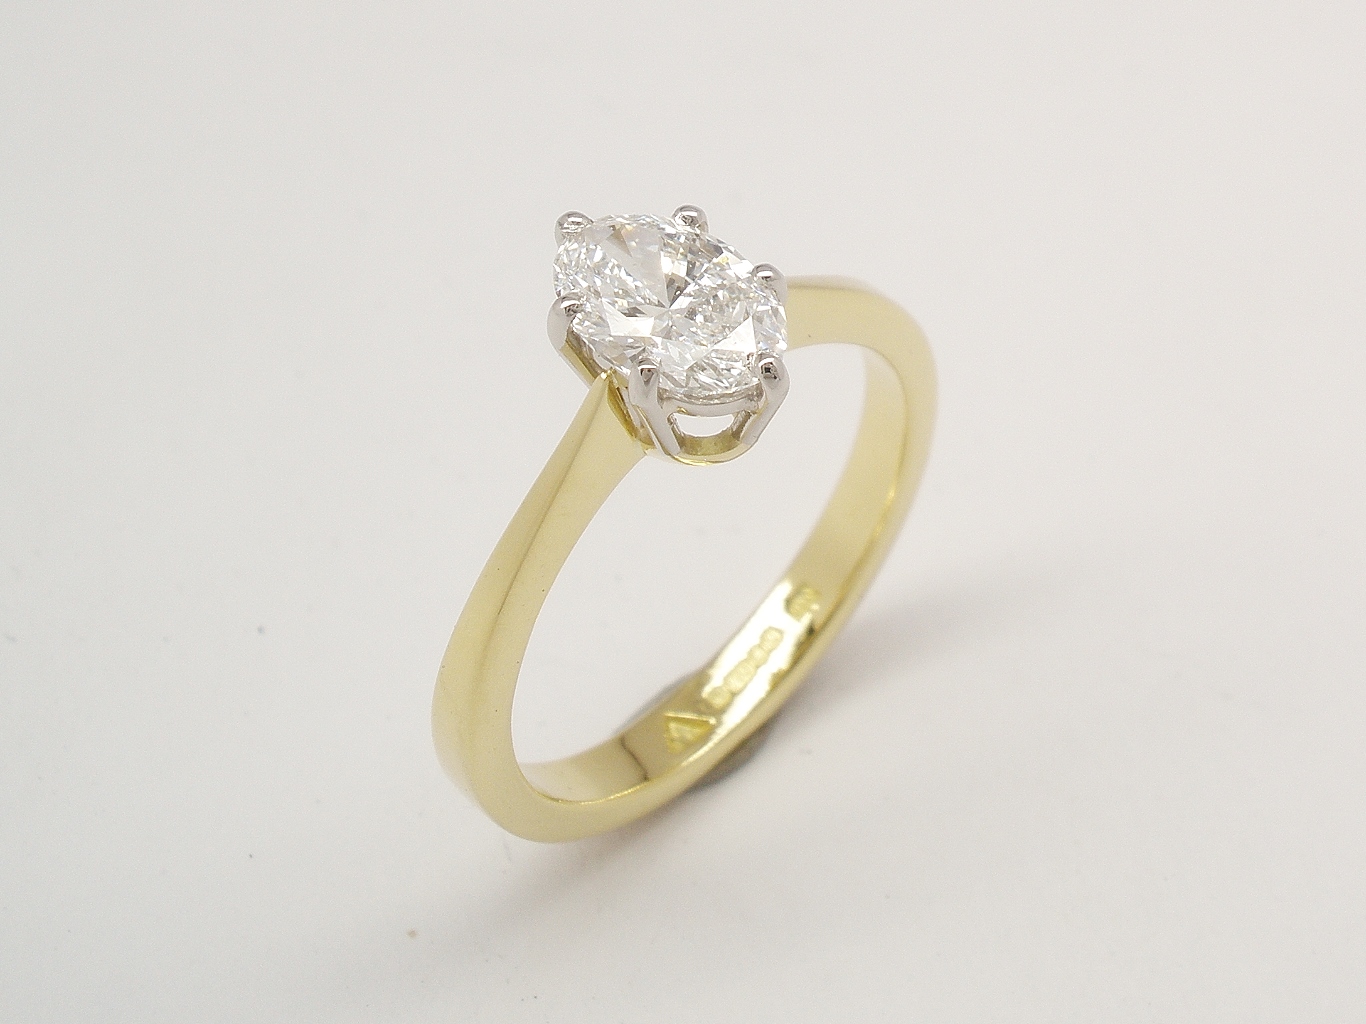 A single stone 0.50ct., 'E' colour, VVS2 clarity oval diamond ring mounted in 18ct. yellow gold and platinum.